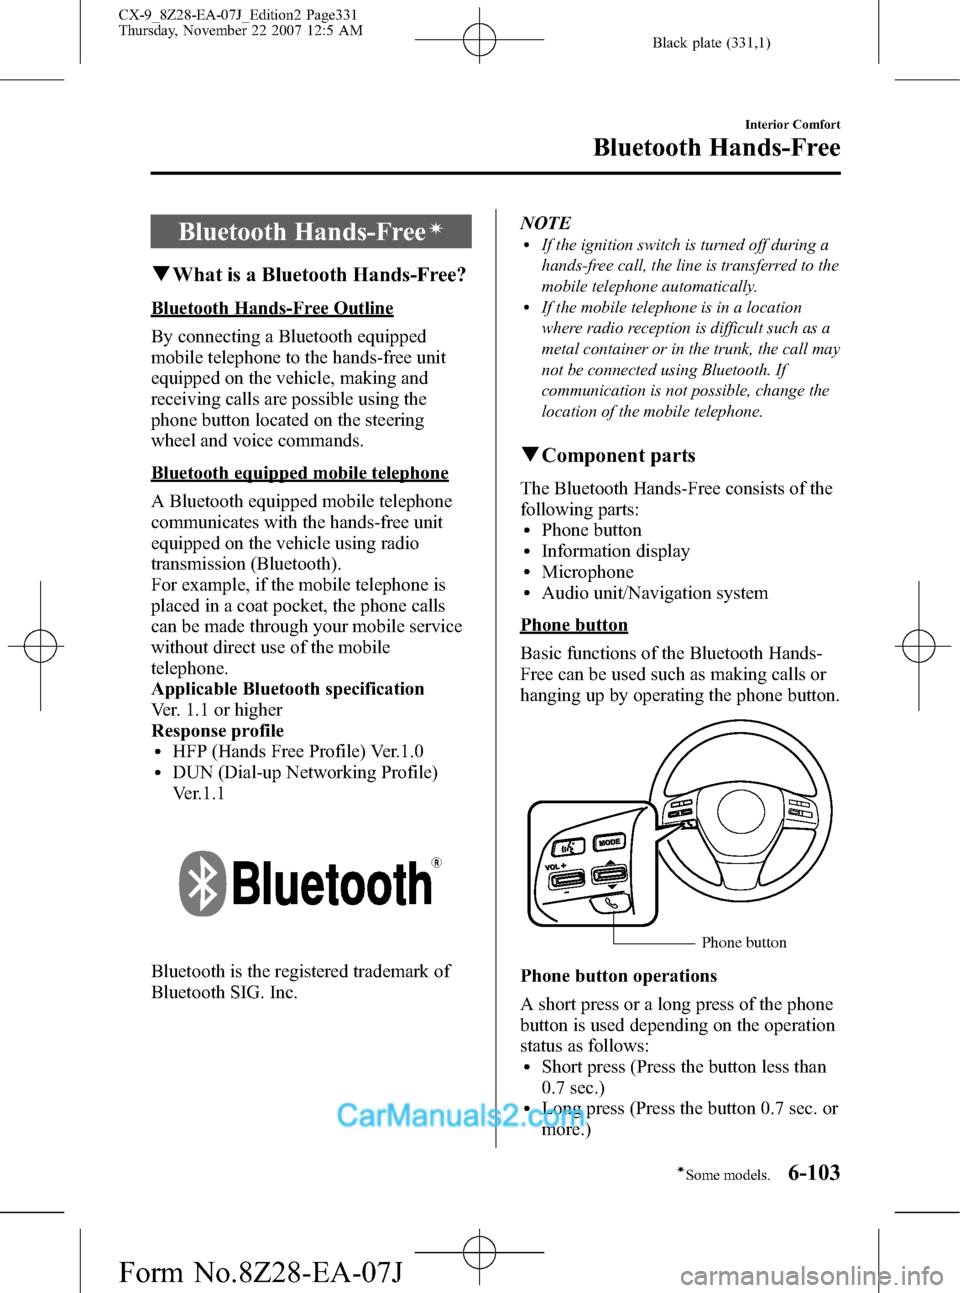 MAZDA MODEL CX-9 2008  Owners Manual (in English) Black plate (331,1)
Bluetooth Hands-Freeí
qWhat is a Bluetooth Hands-Free?
Bluetooth Hands-Free Outline
By connecting a Bluetooth equipped
mobile telephone to the hands-free unit
equipped on the vehi